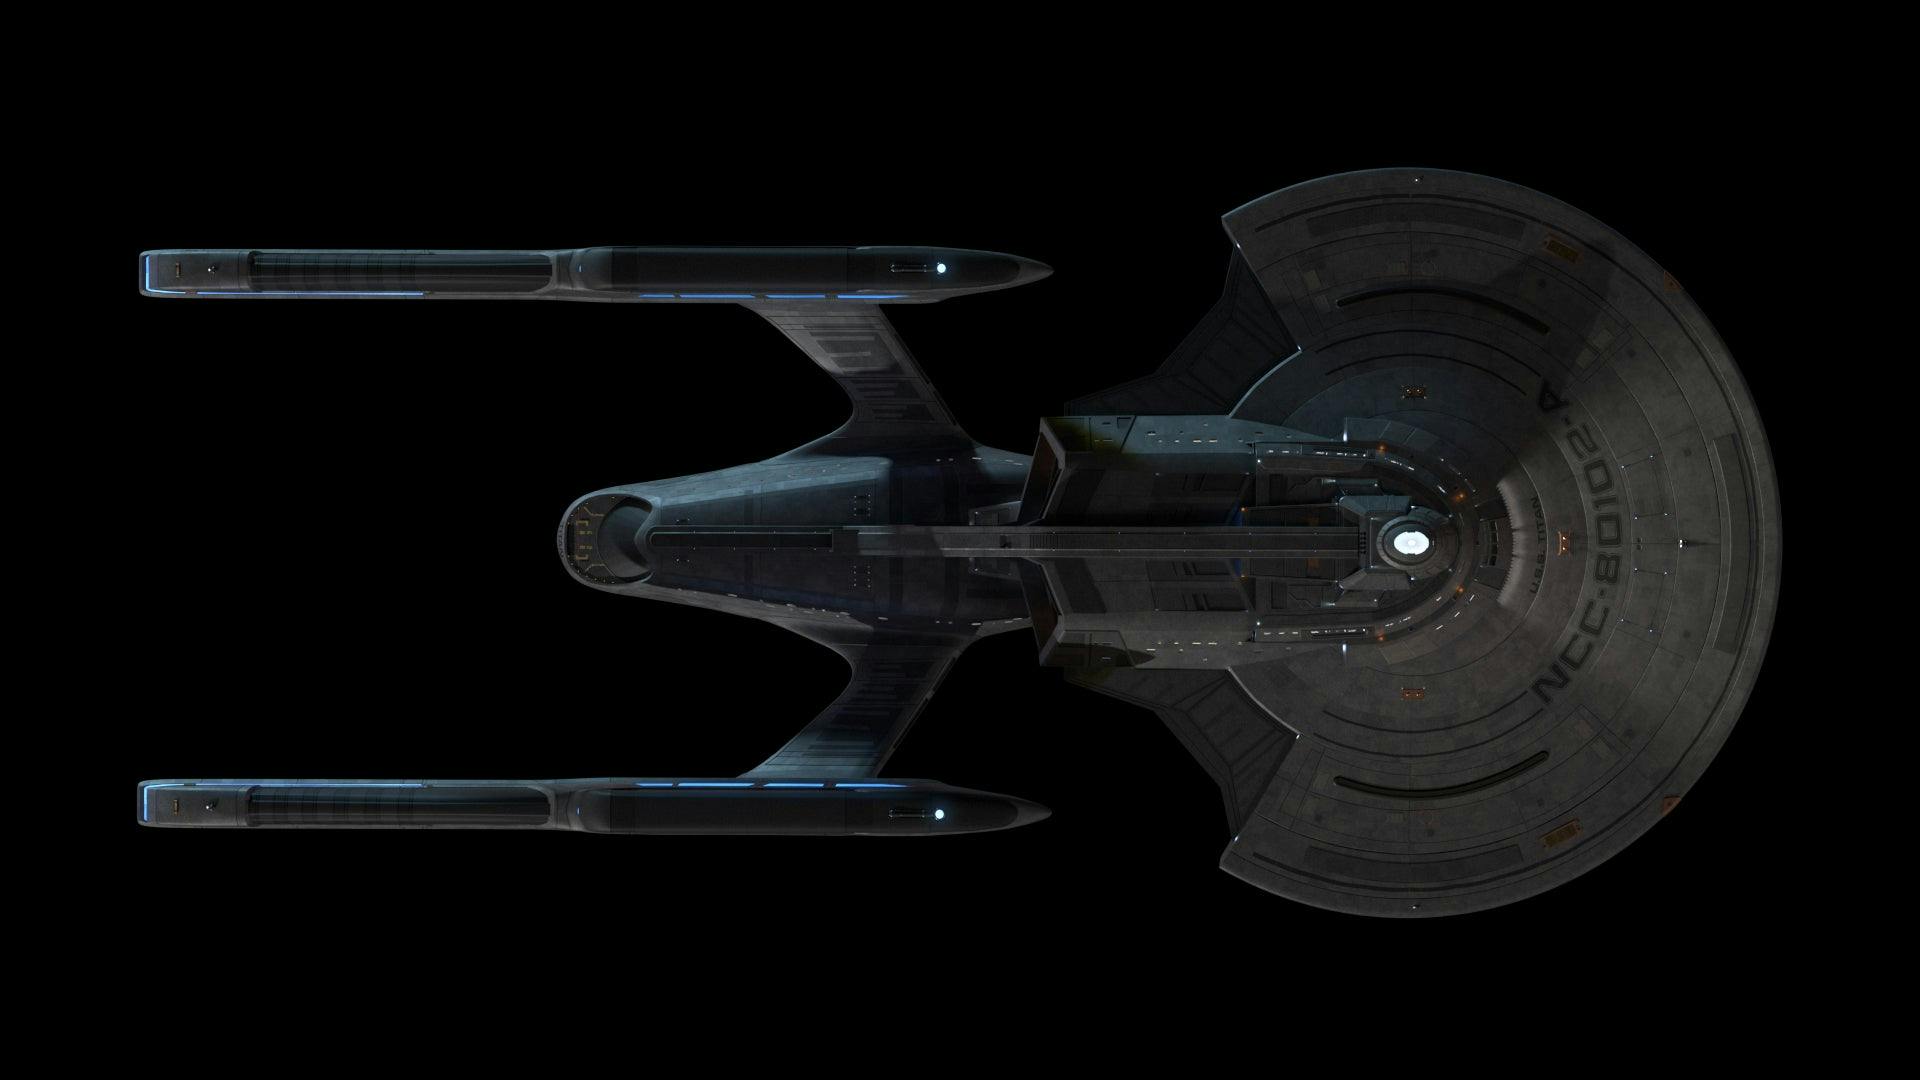 Overhead view of the U.S.S. Titan from Star Trek: Picard